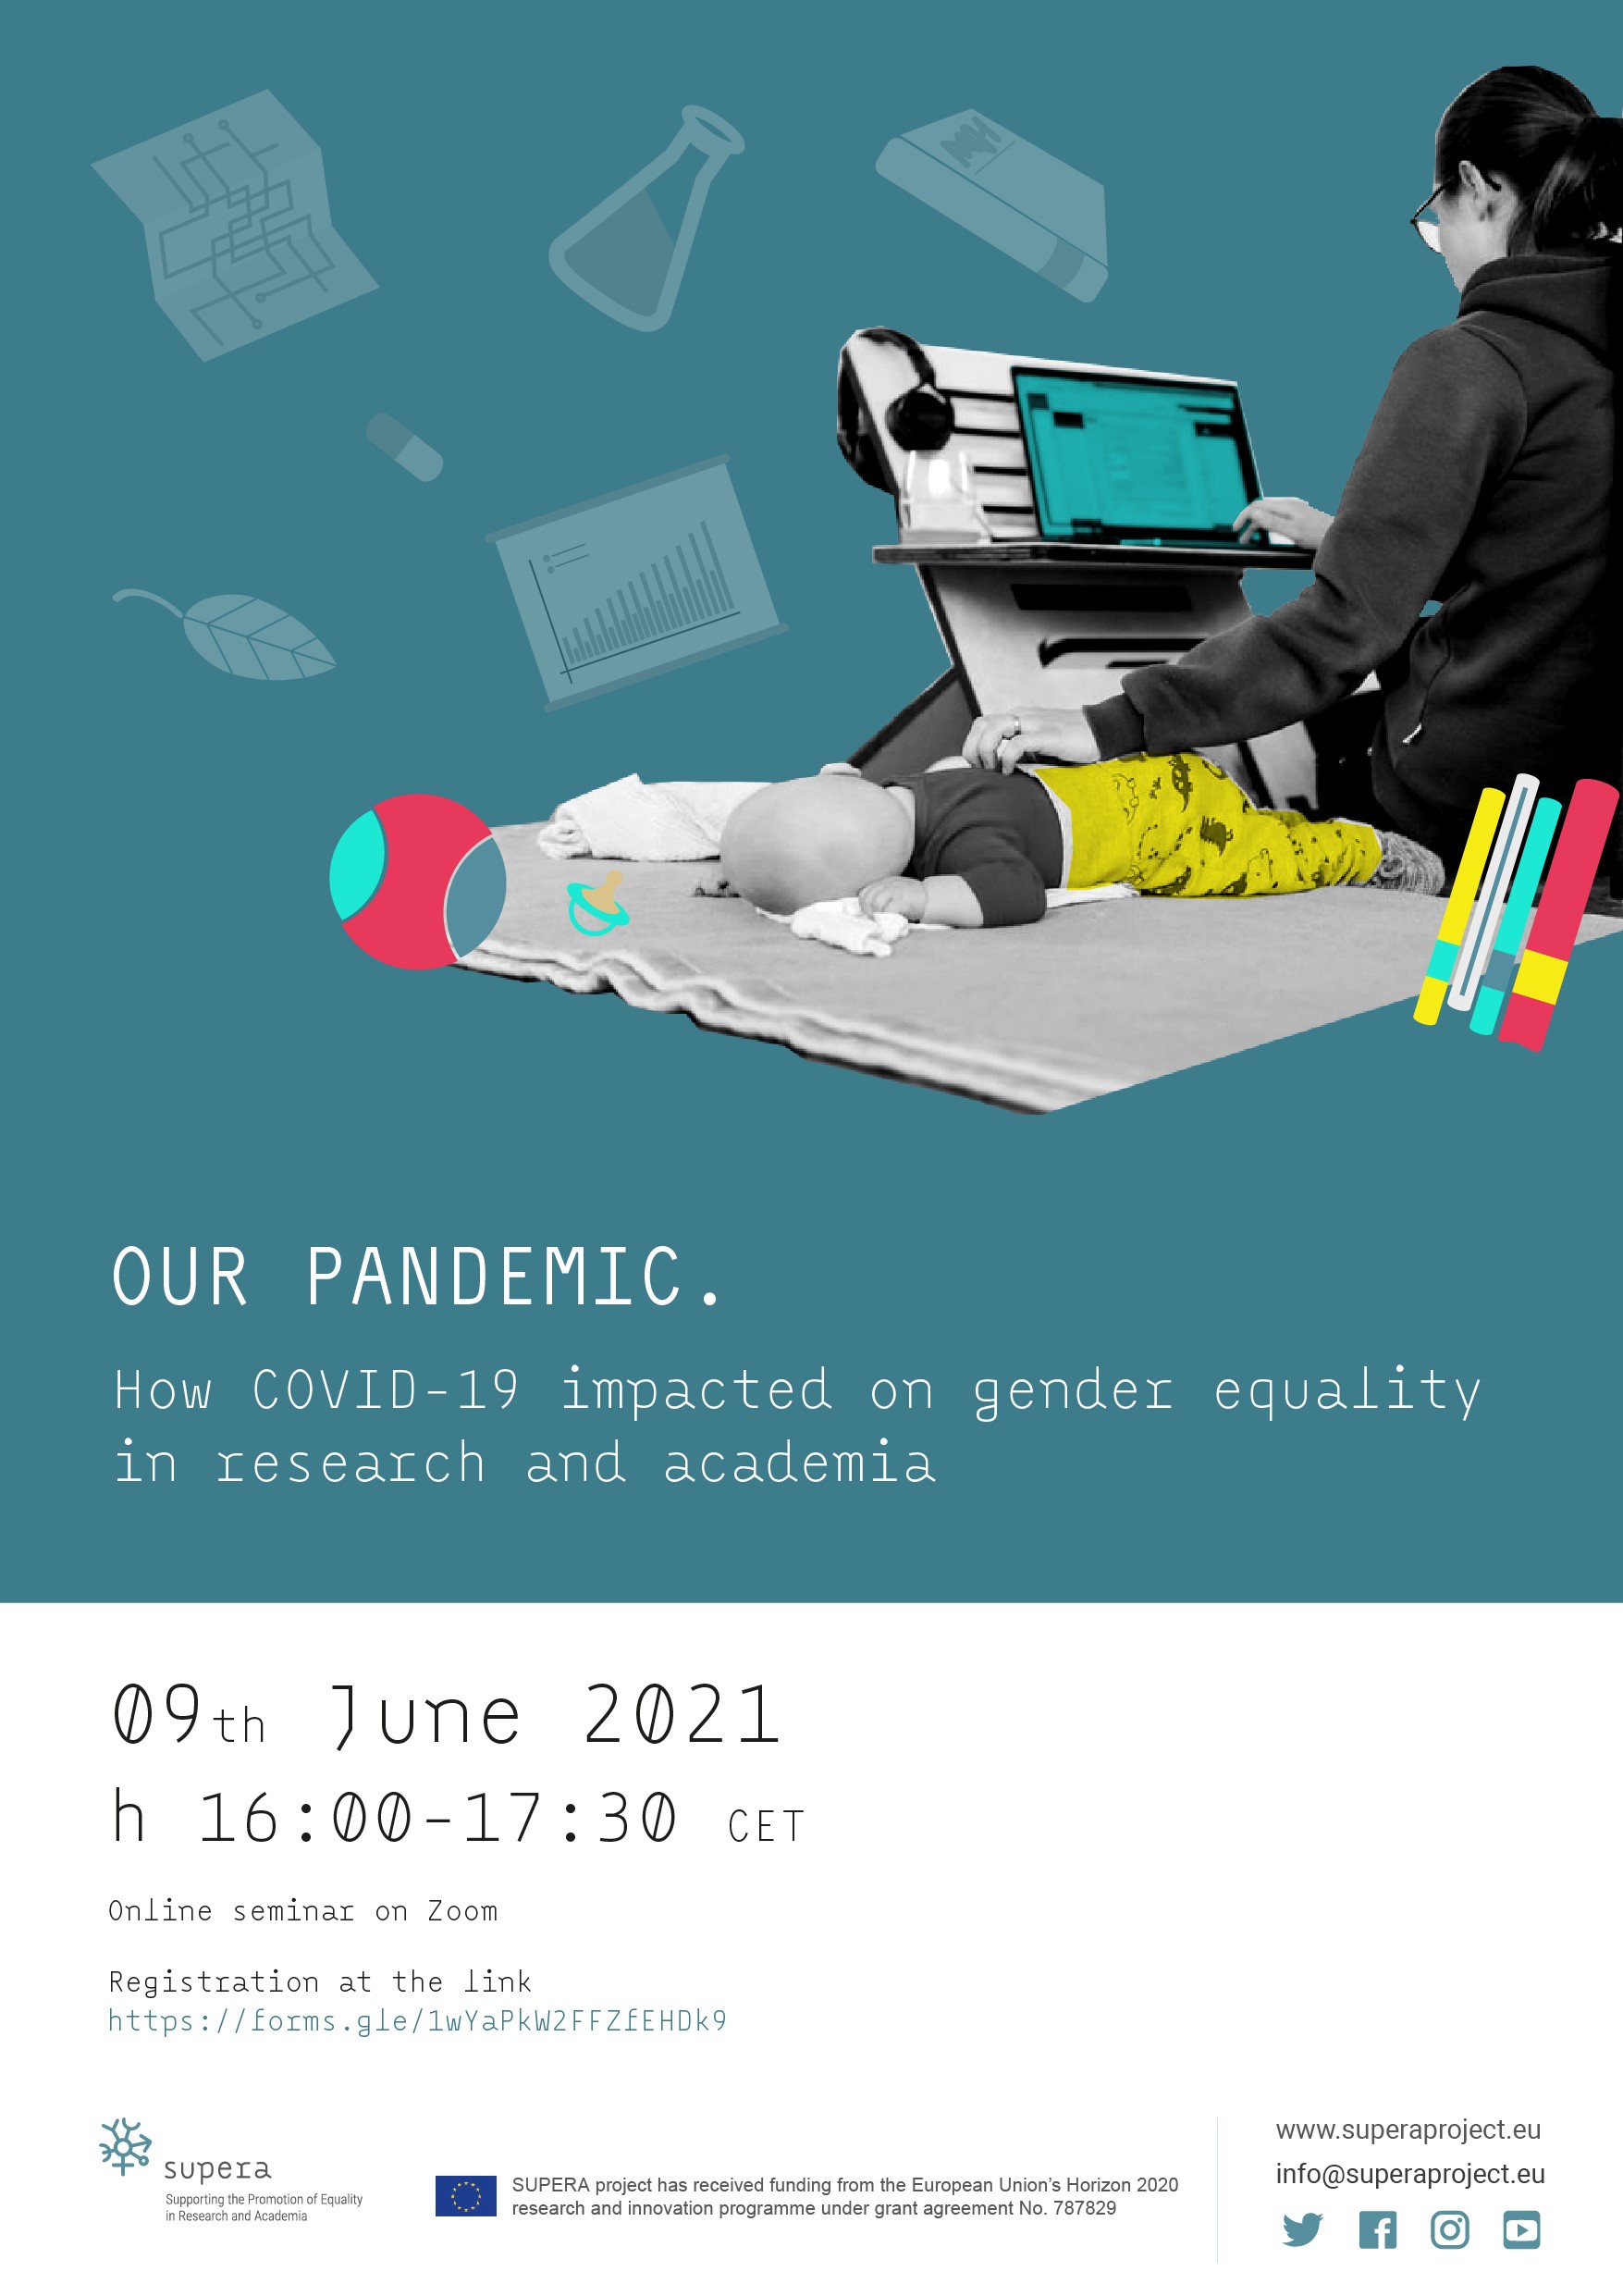 How COVID-19 impacted on gender equality in research and academia<span id="edit_34526"><script>$(function() { $('#edit_34526').load( "/myces/user/editobj.php?tipo=evento&id=34526" ); });</script></span>